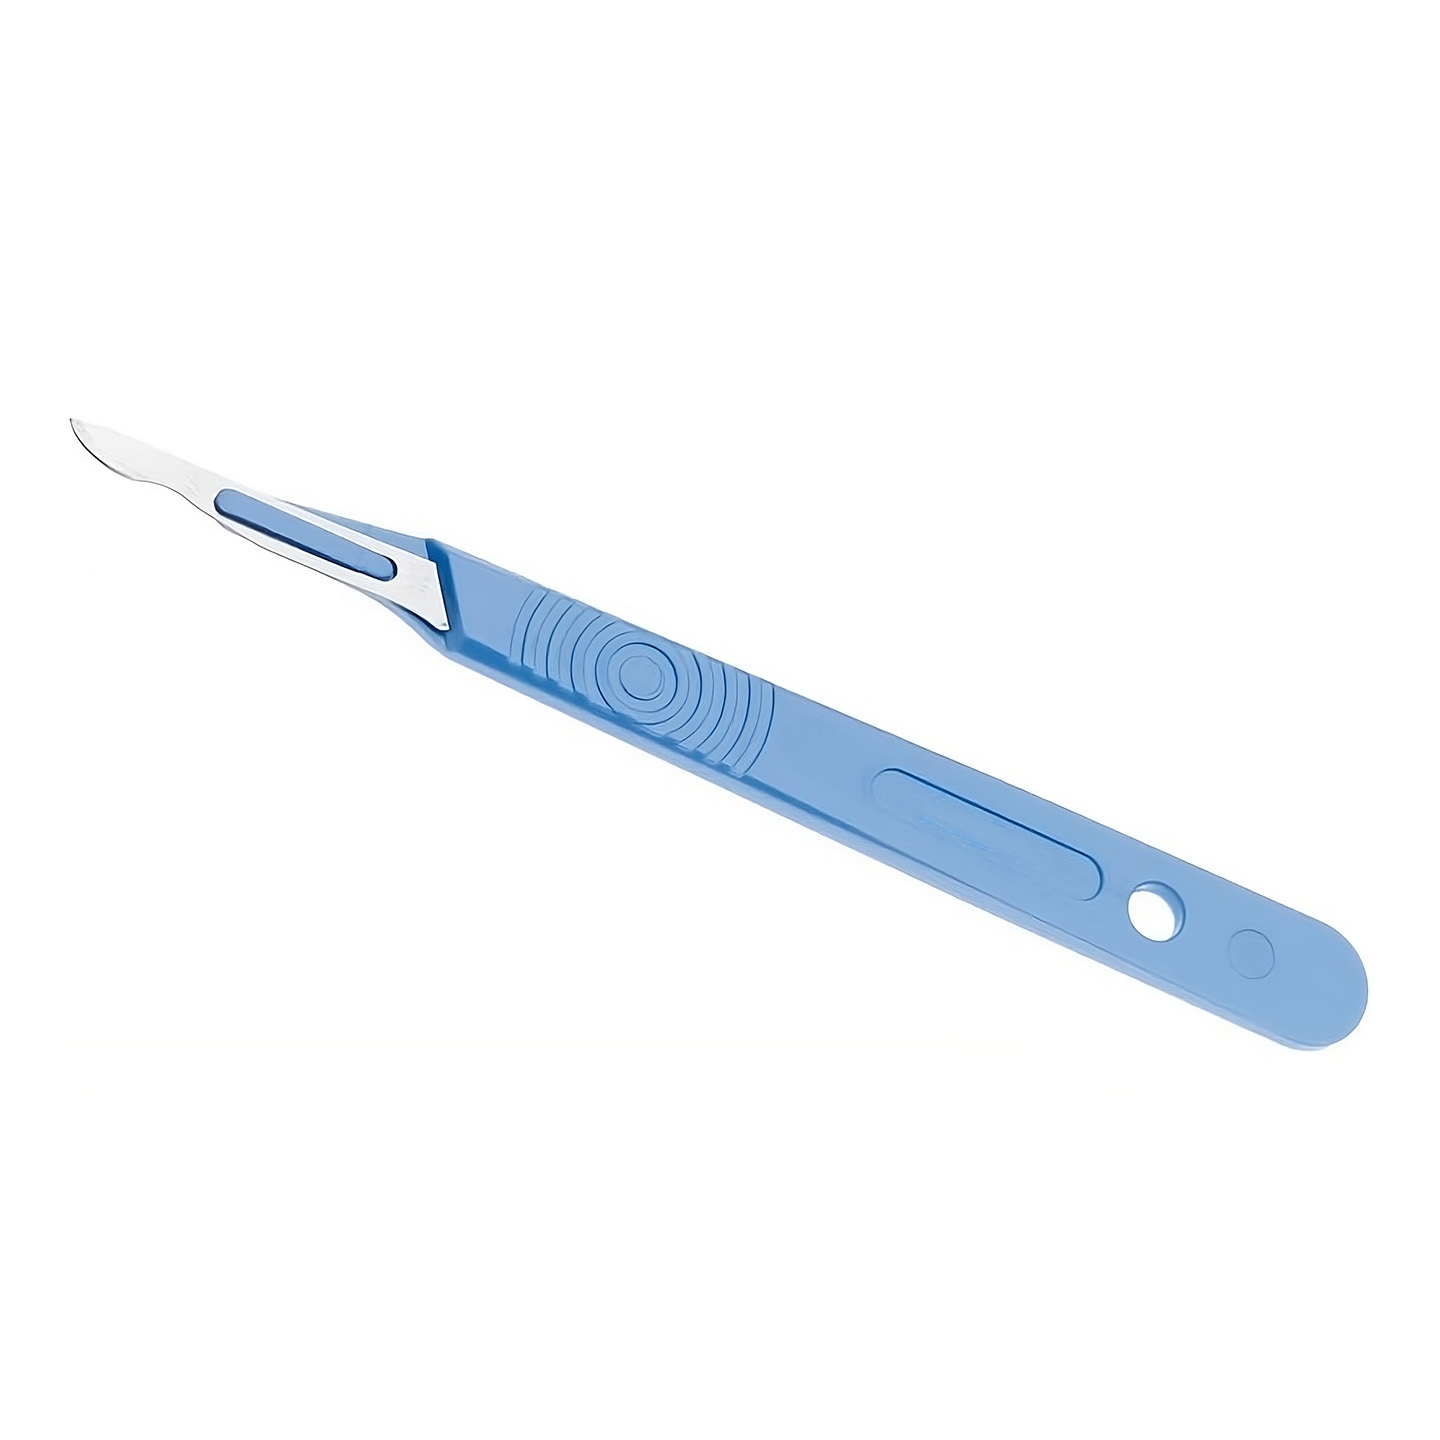 Disposable Scalpels, Stainless Steel Blade, Plastic Handle